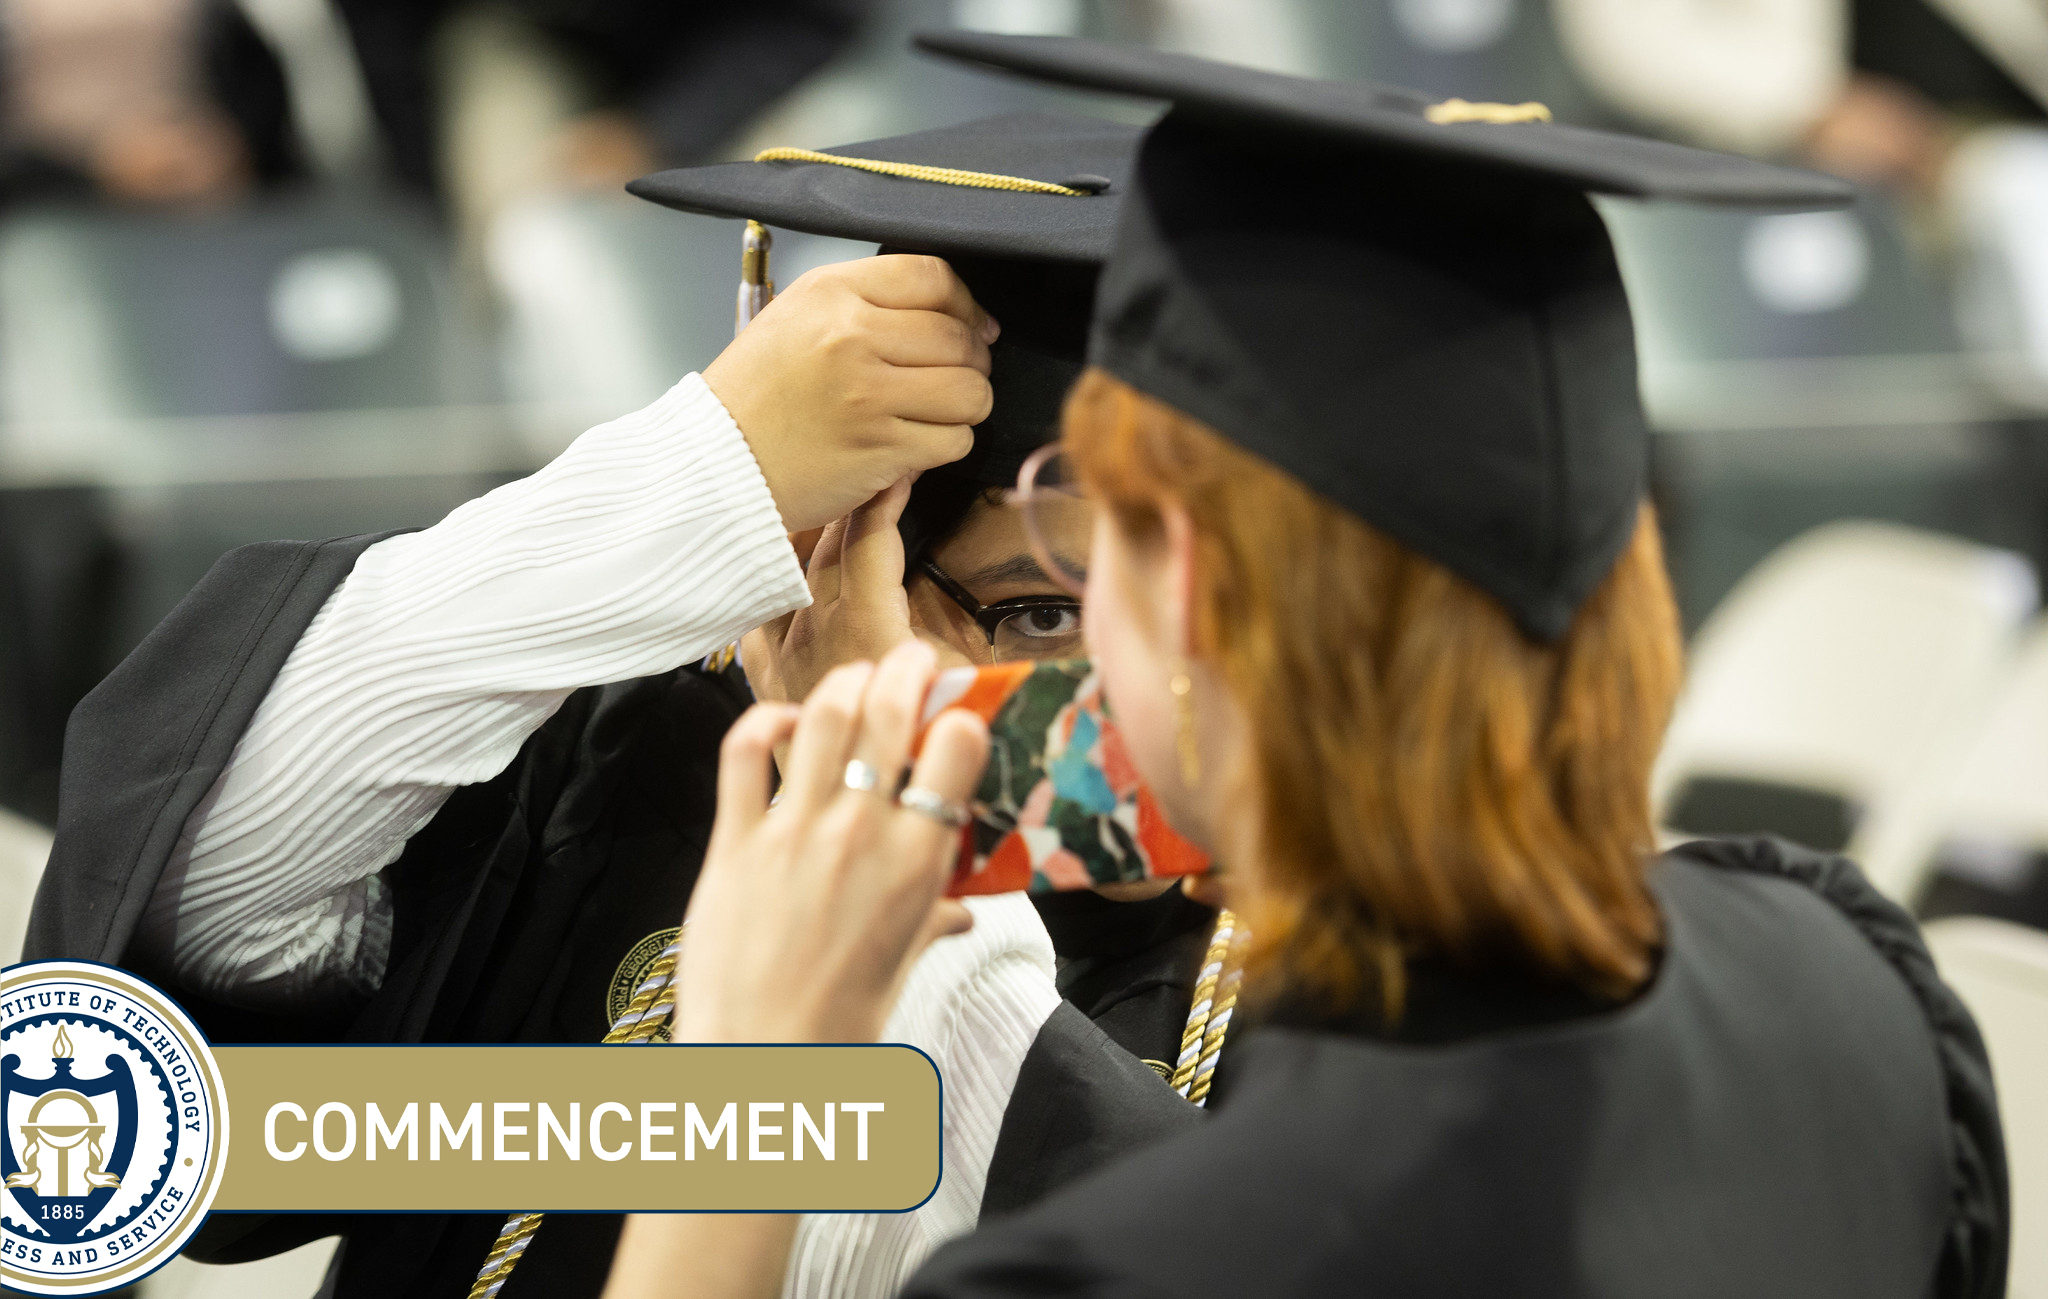 A student adjusts their mortar board at Commencement